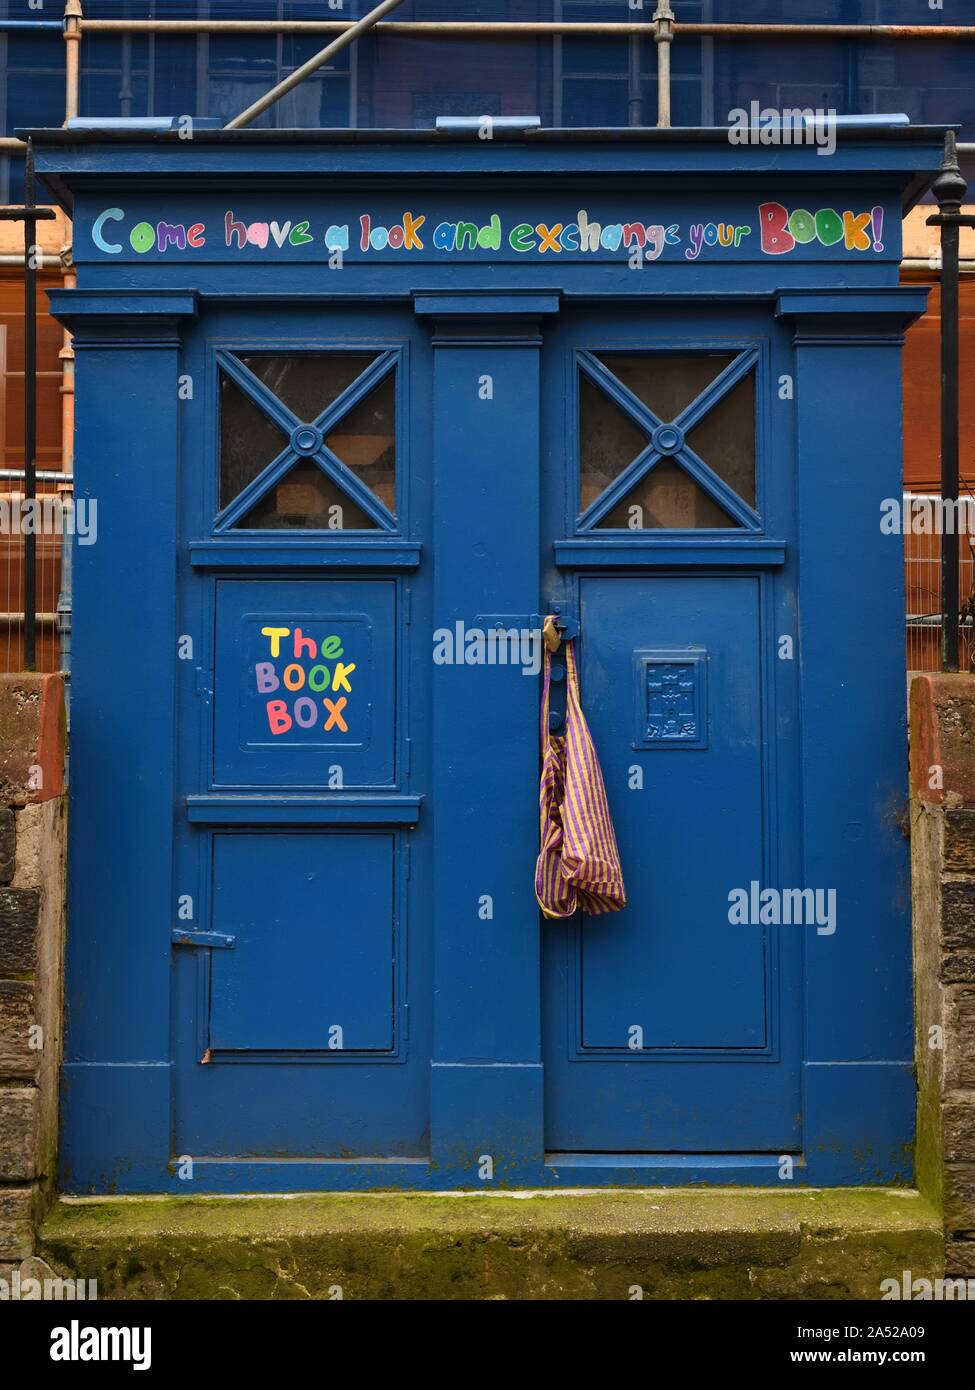 The Book Box book exchange at Edinburgh's Royal Mile Primary School which is a converted police box, in Scotland, UK Stock Photo